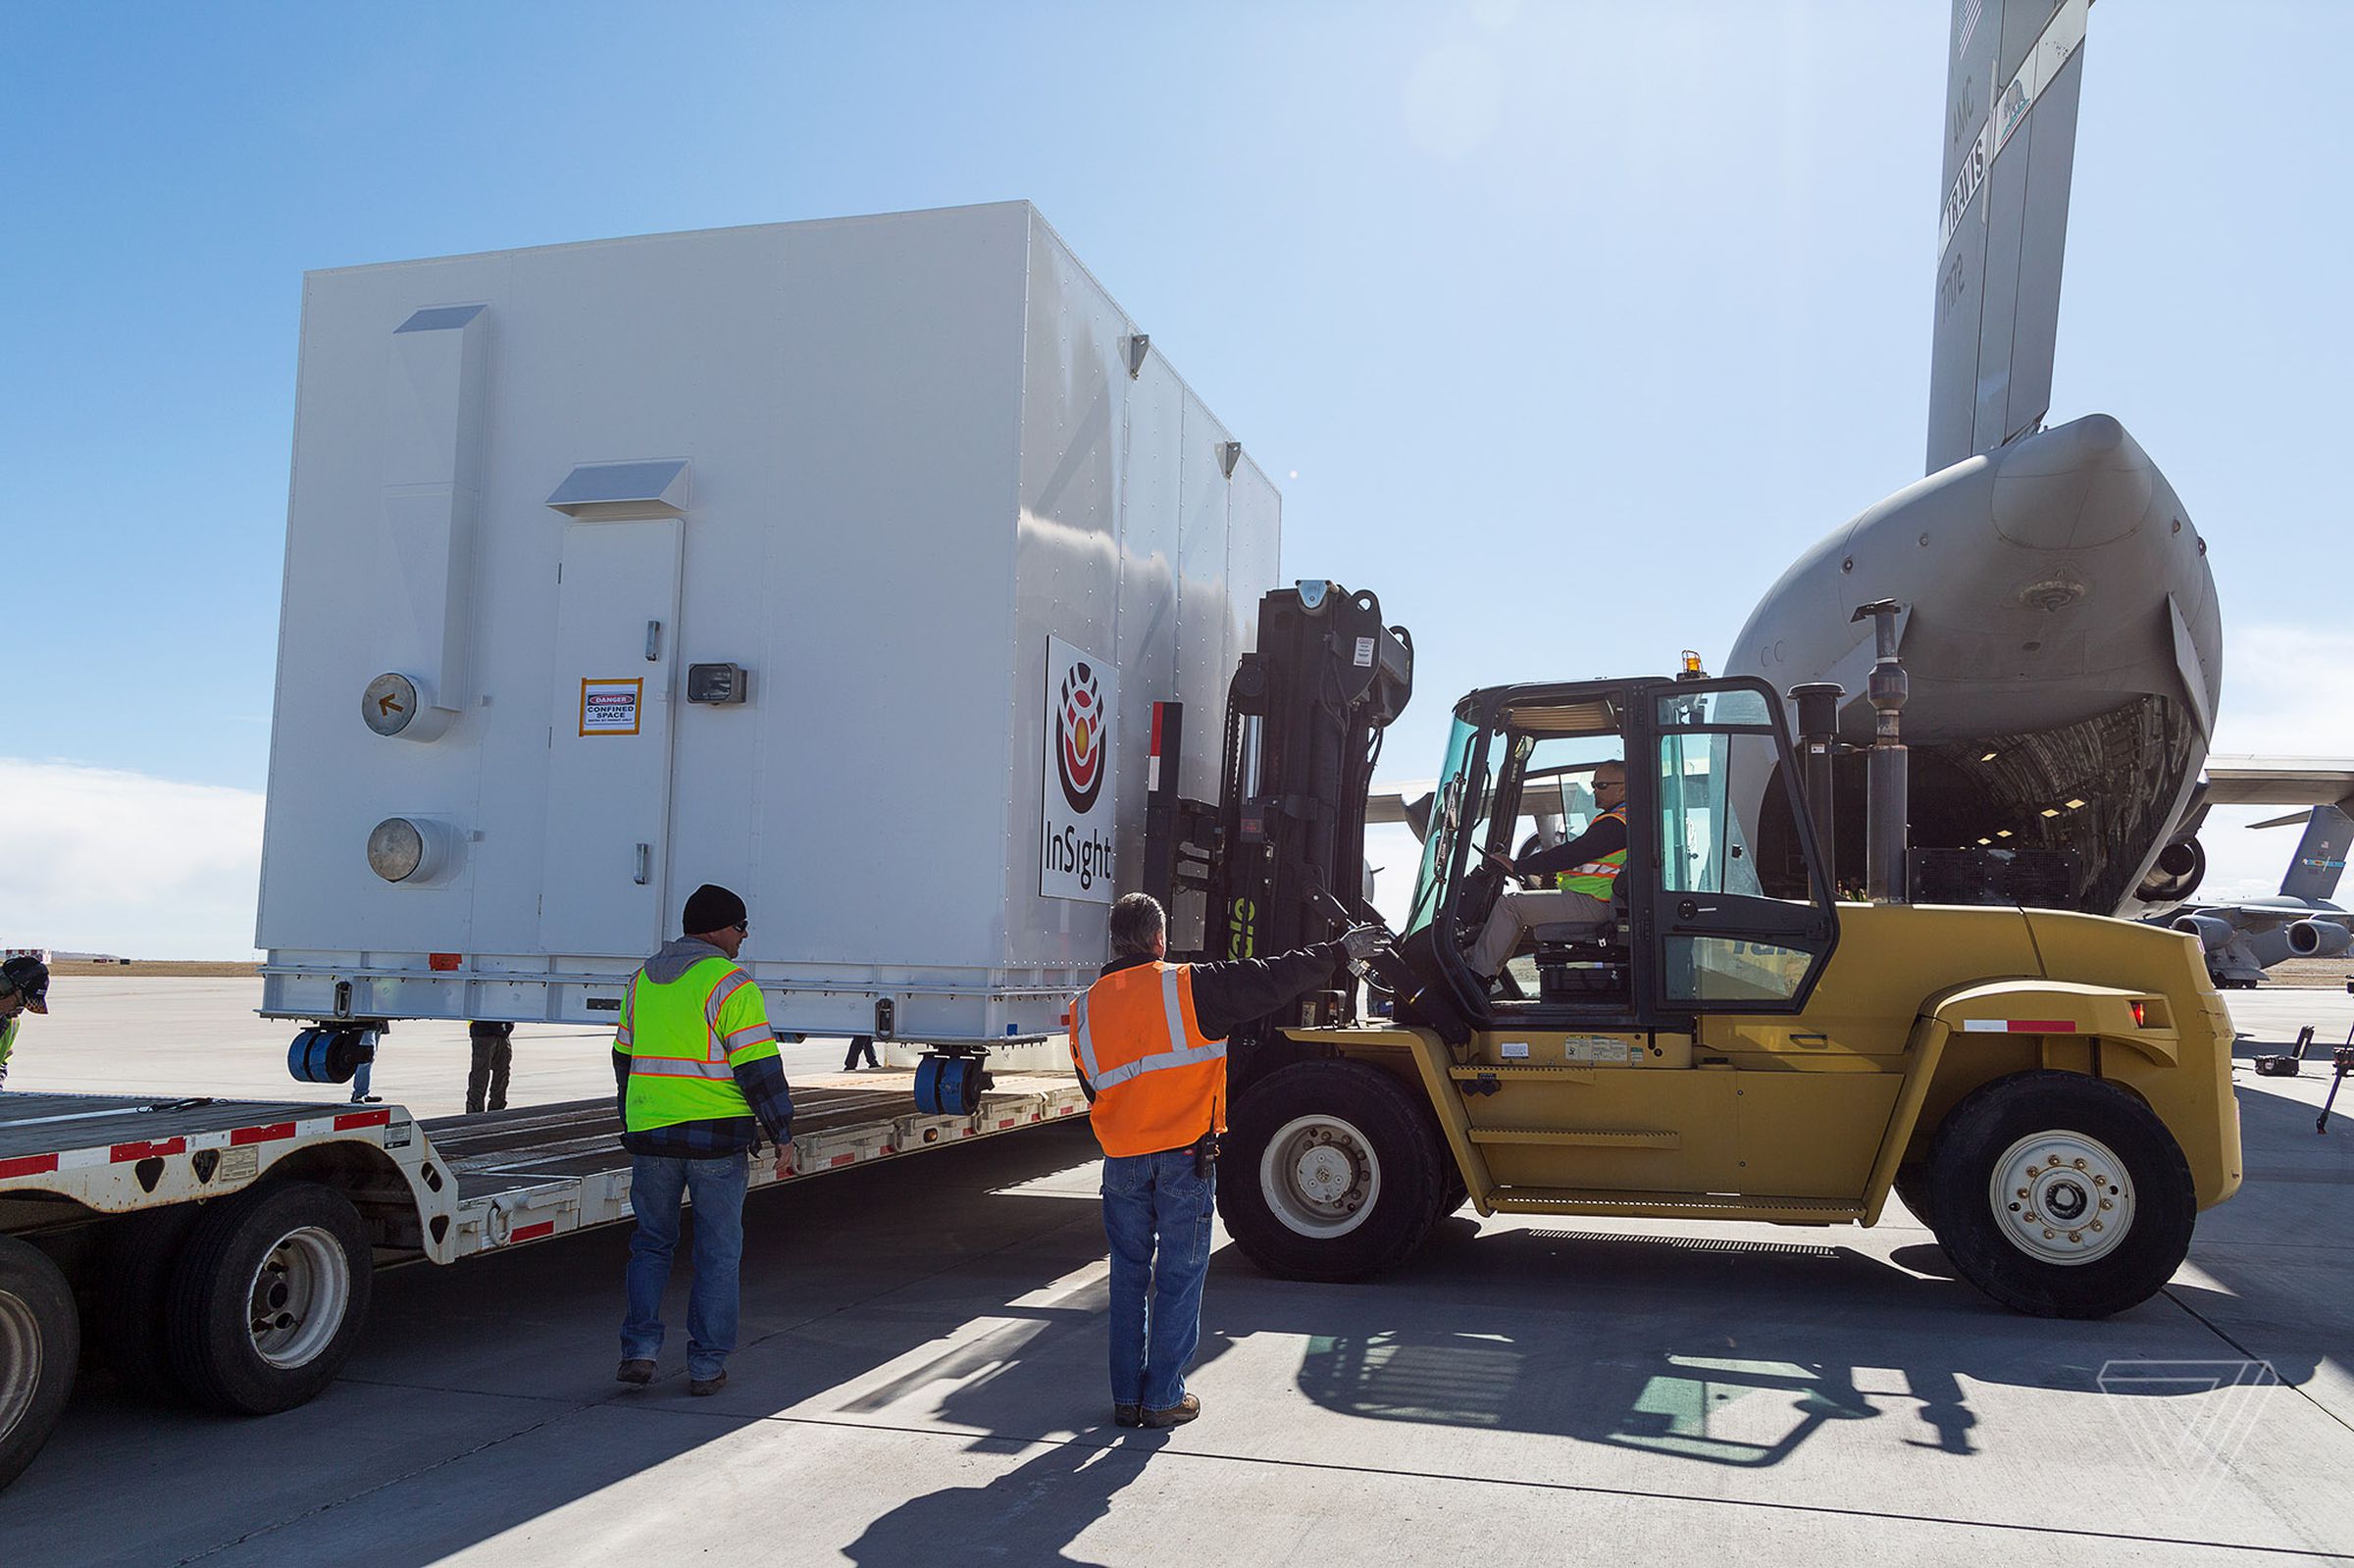 A forklift is used to move InSight’s container onto the ground